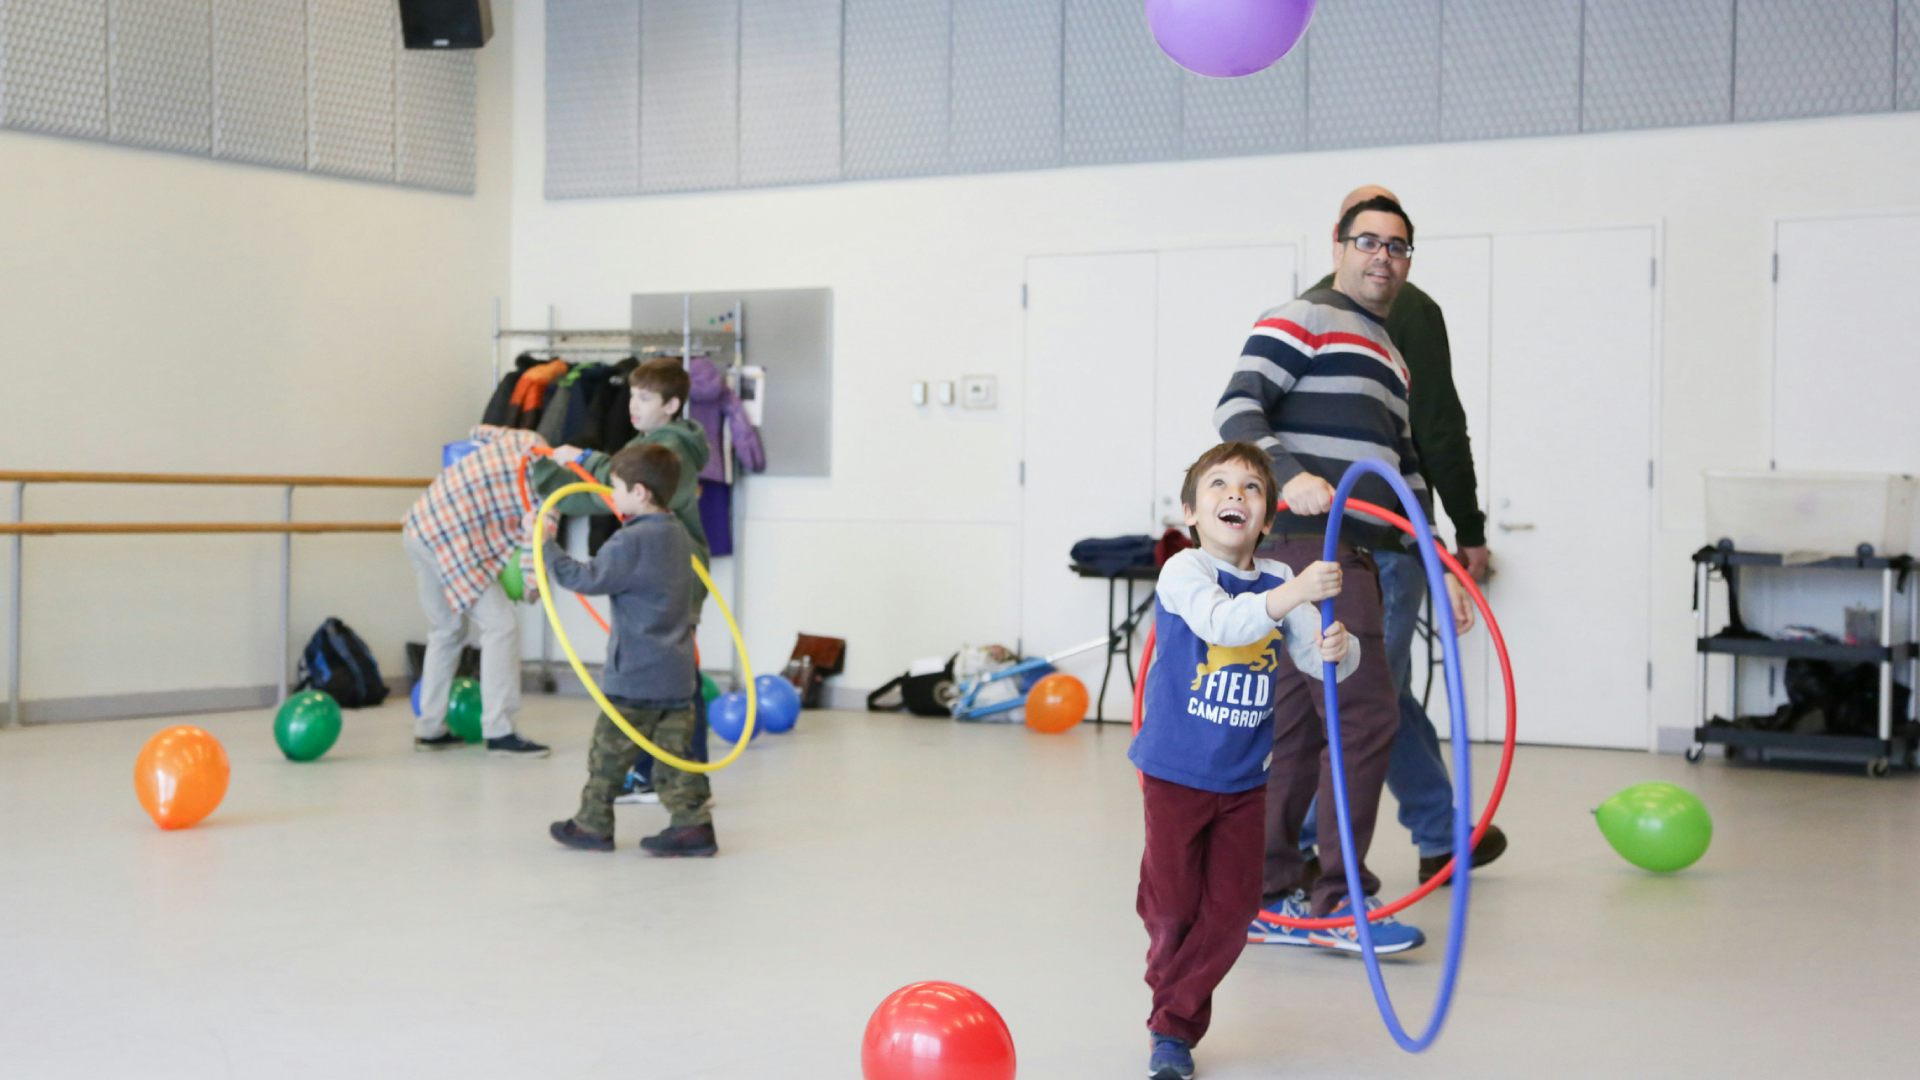 A boy plays with a hula hoop inside a dance studio, with others play behind him.